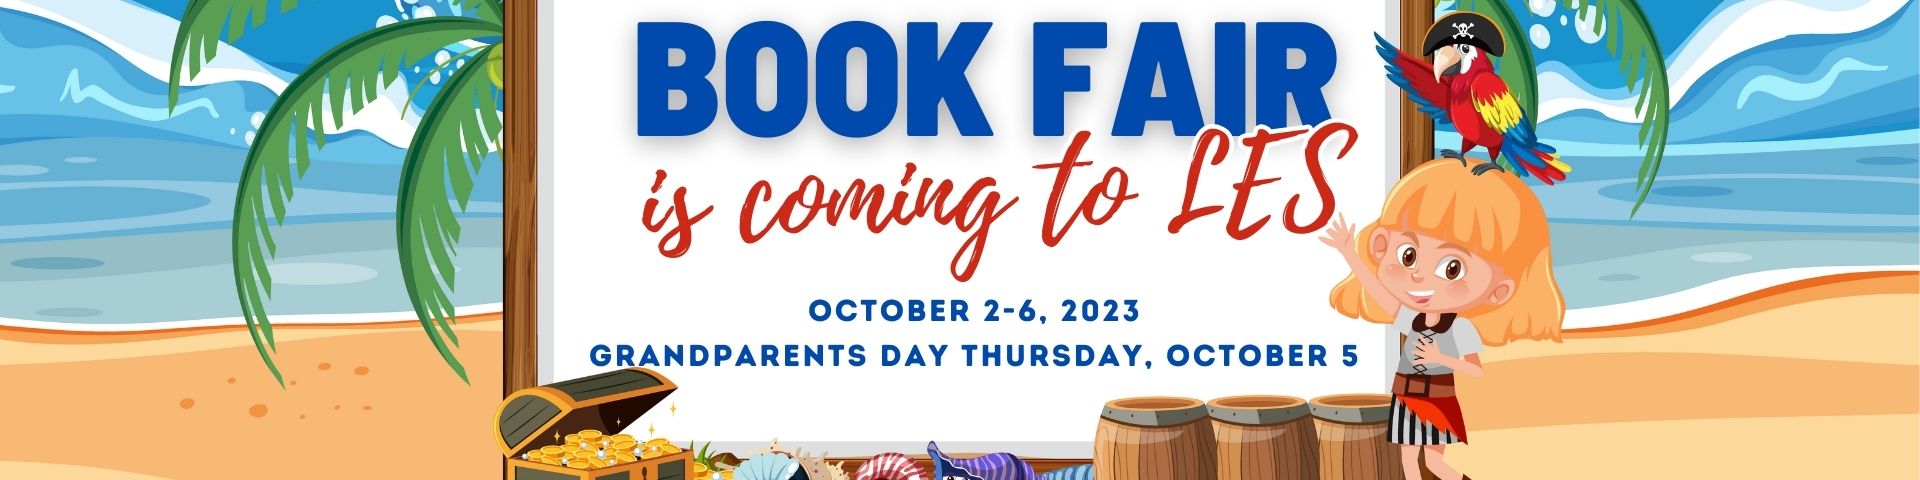 Book Fair is coming to LES October 2-6, 2023. Grandparents Day Thursday, October 5.